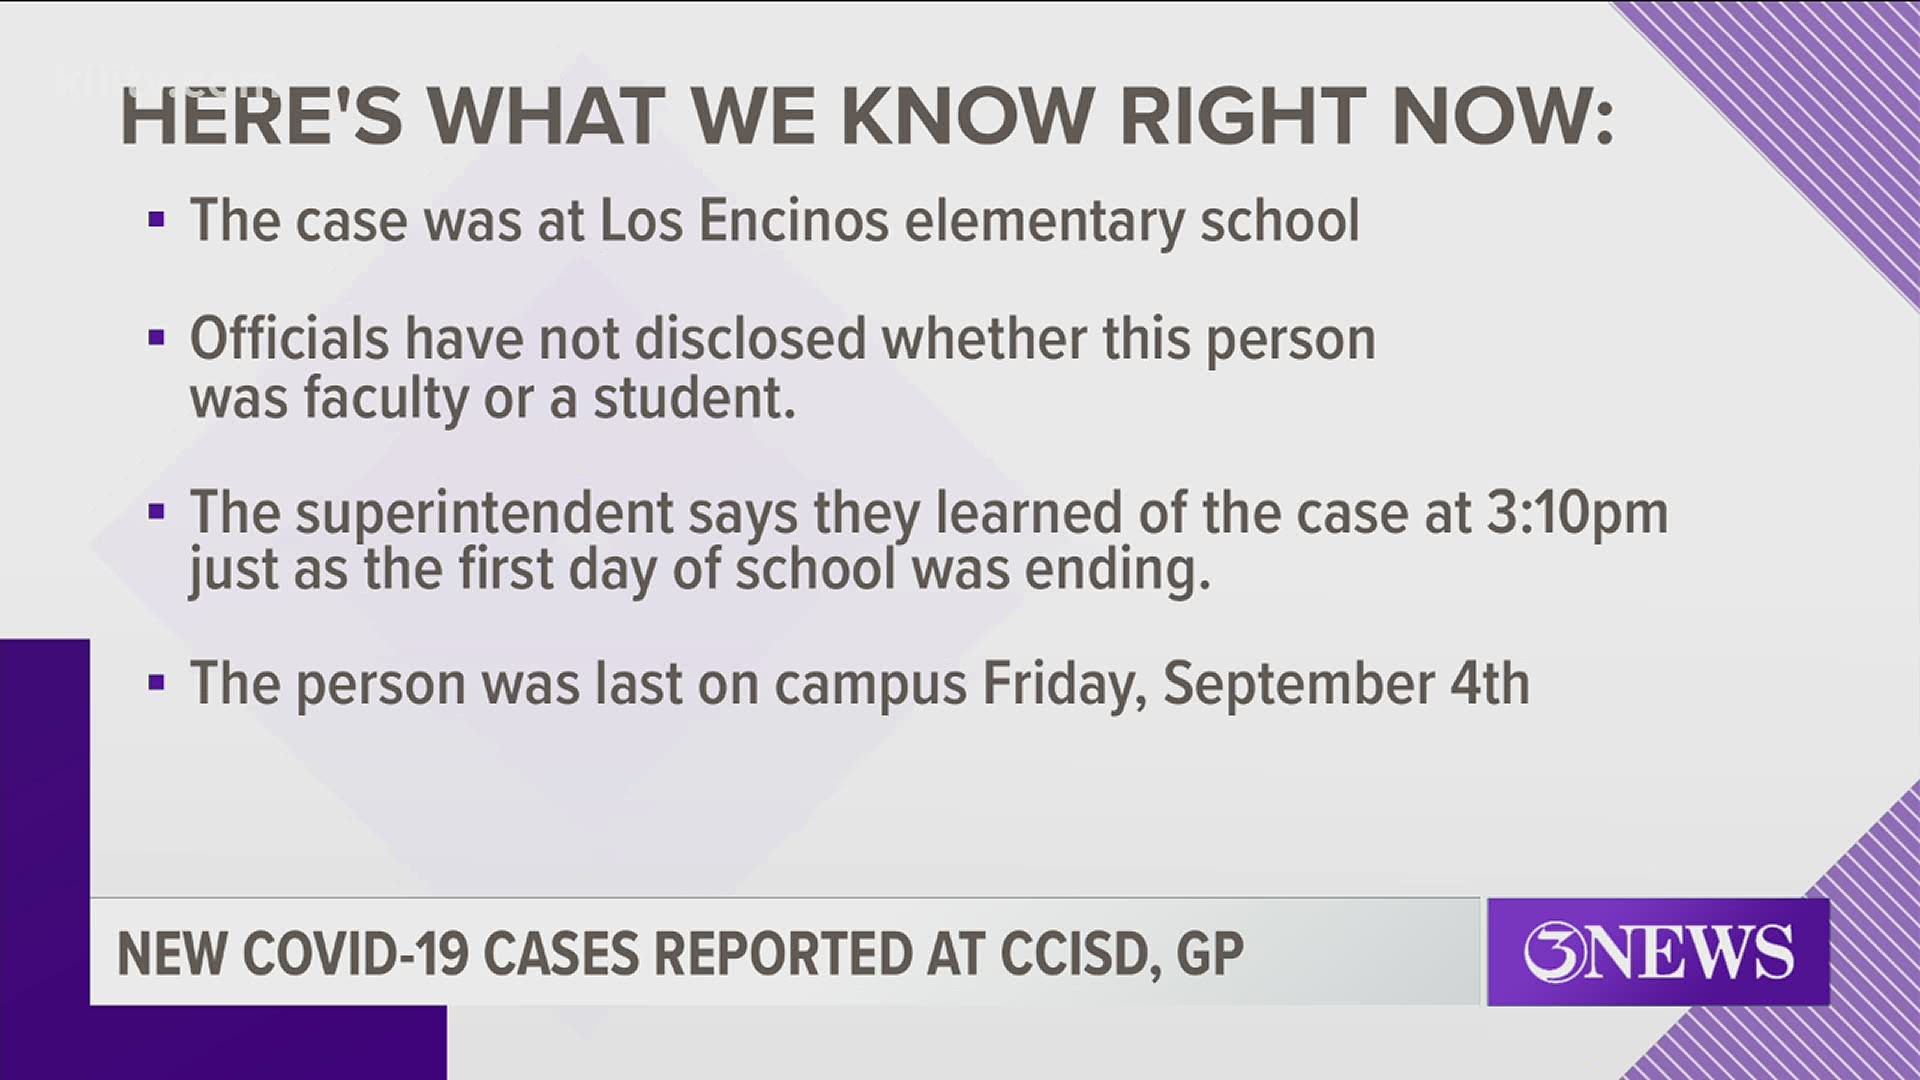 Officials with the school said the person was last on campus on Friday, September 4.